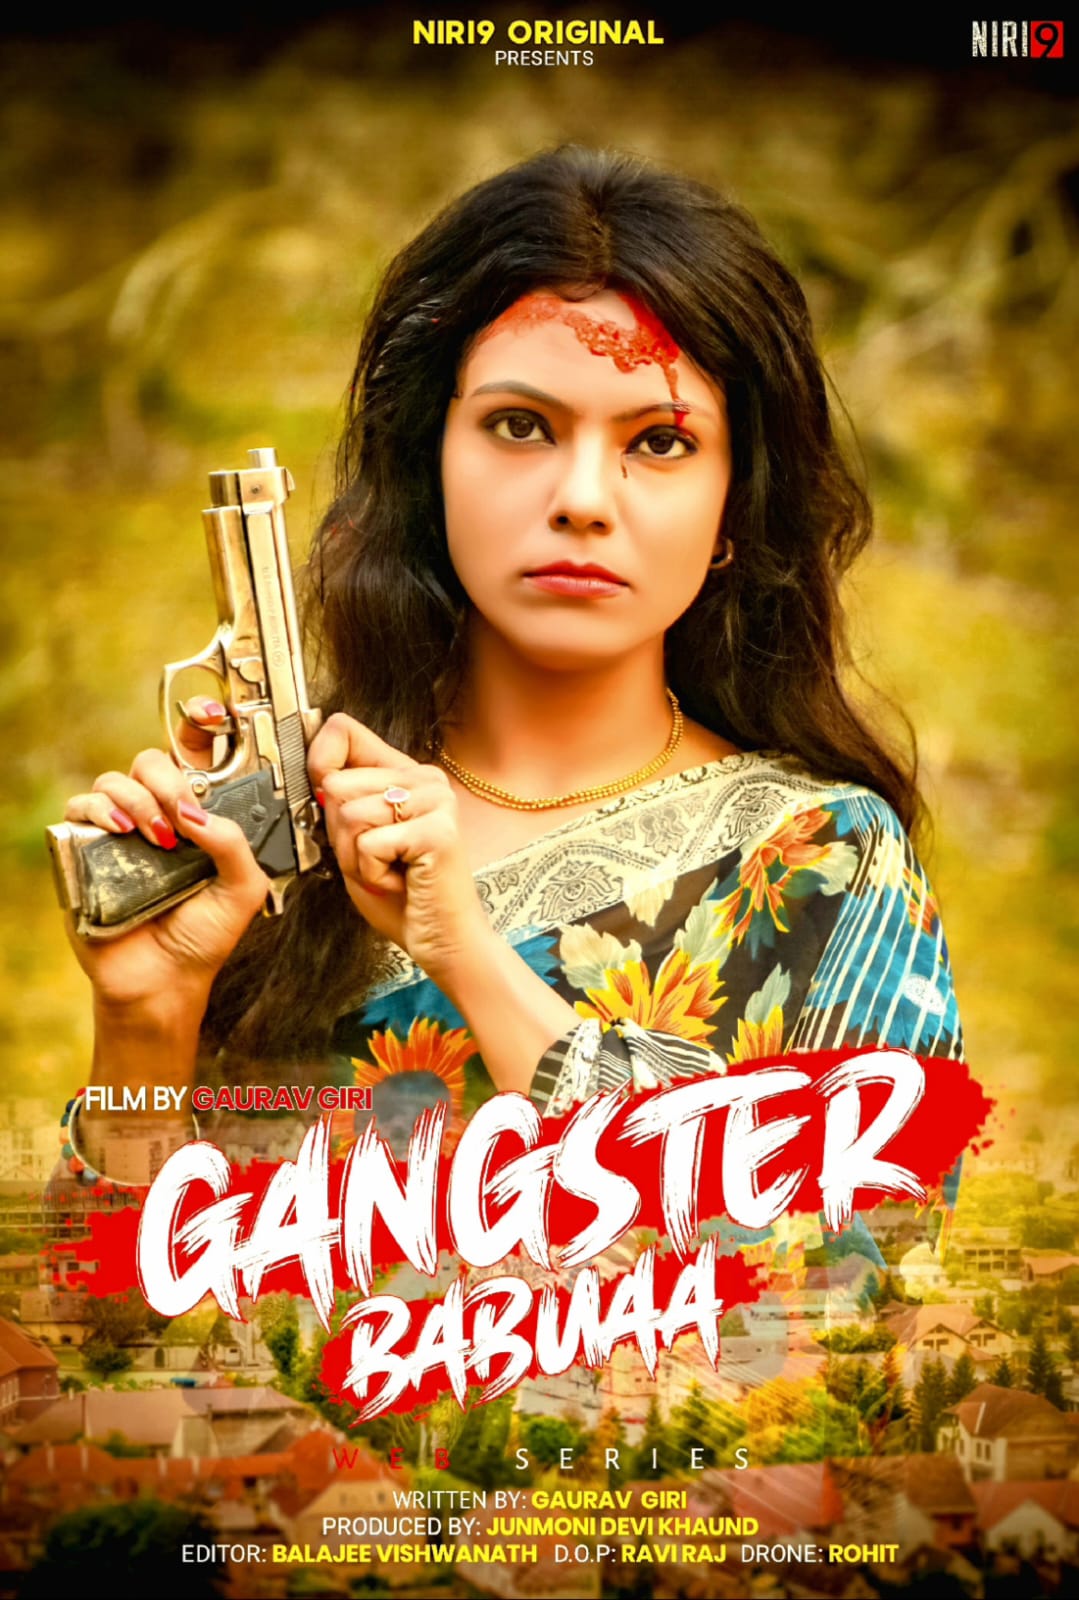 Gangaster Babuaa Web Series Cast, Wiki, Trailer and all episodes videos will available very soon on Niri 9